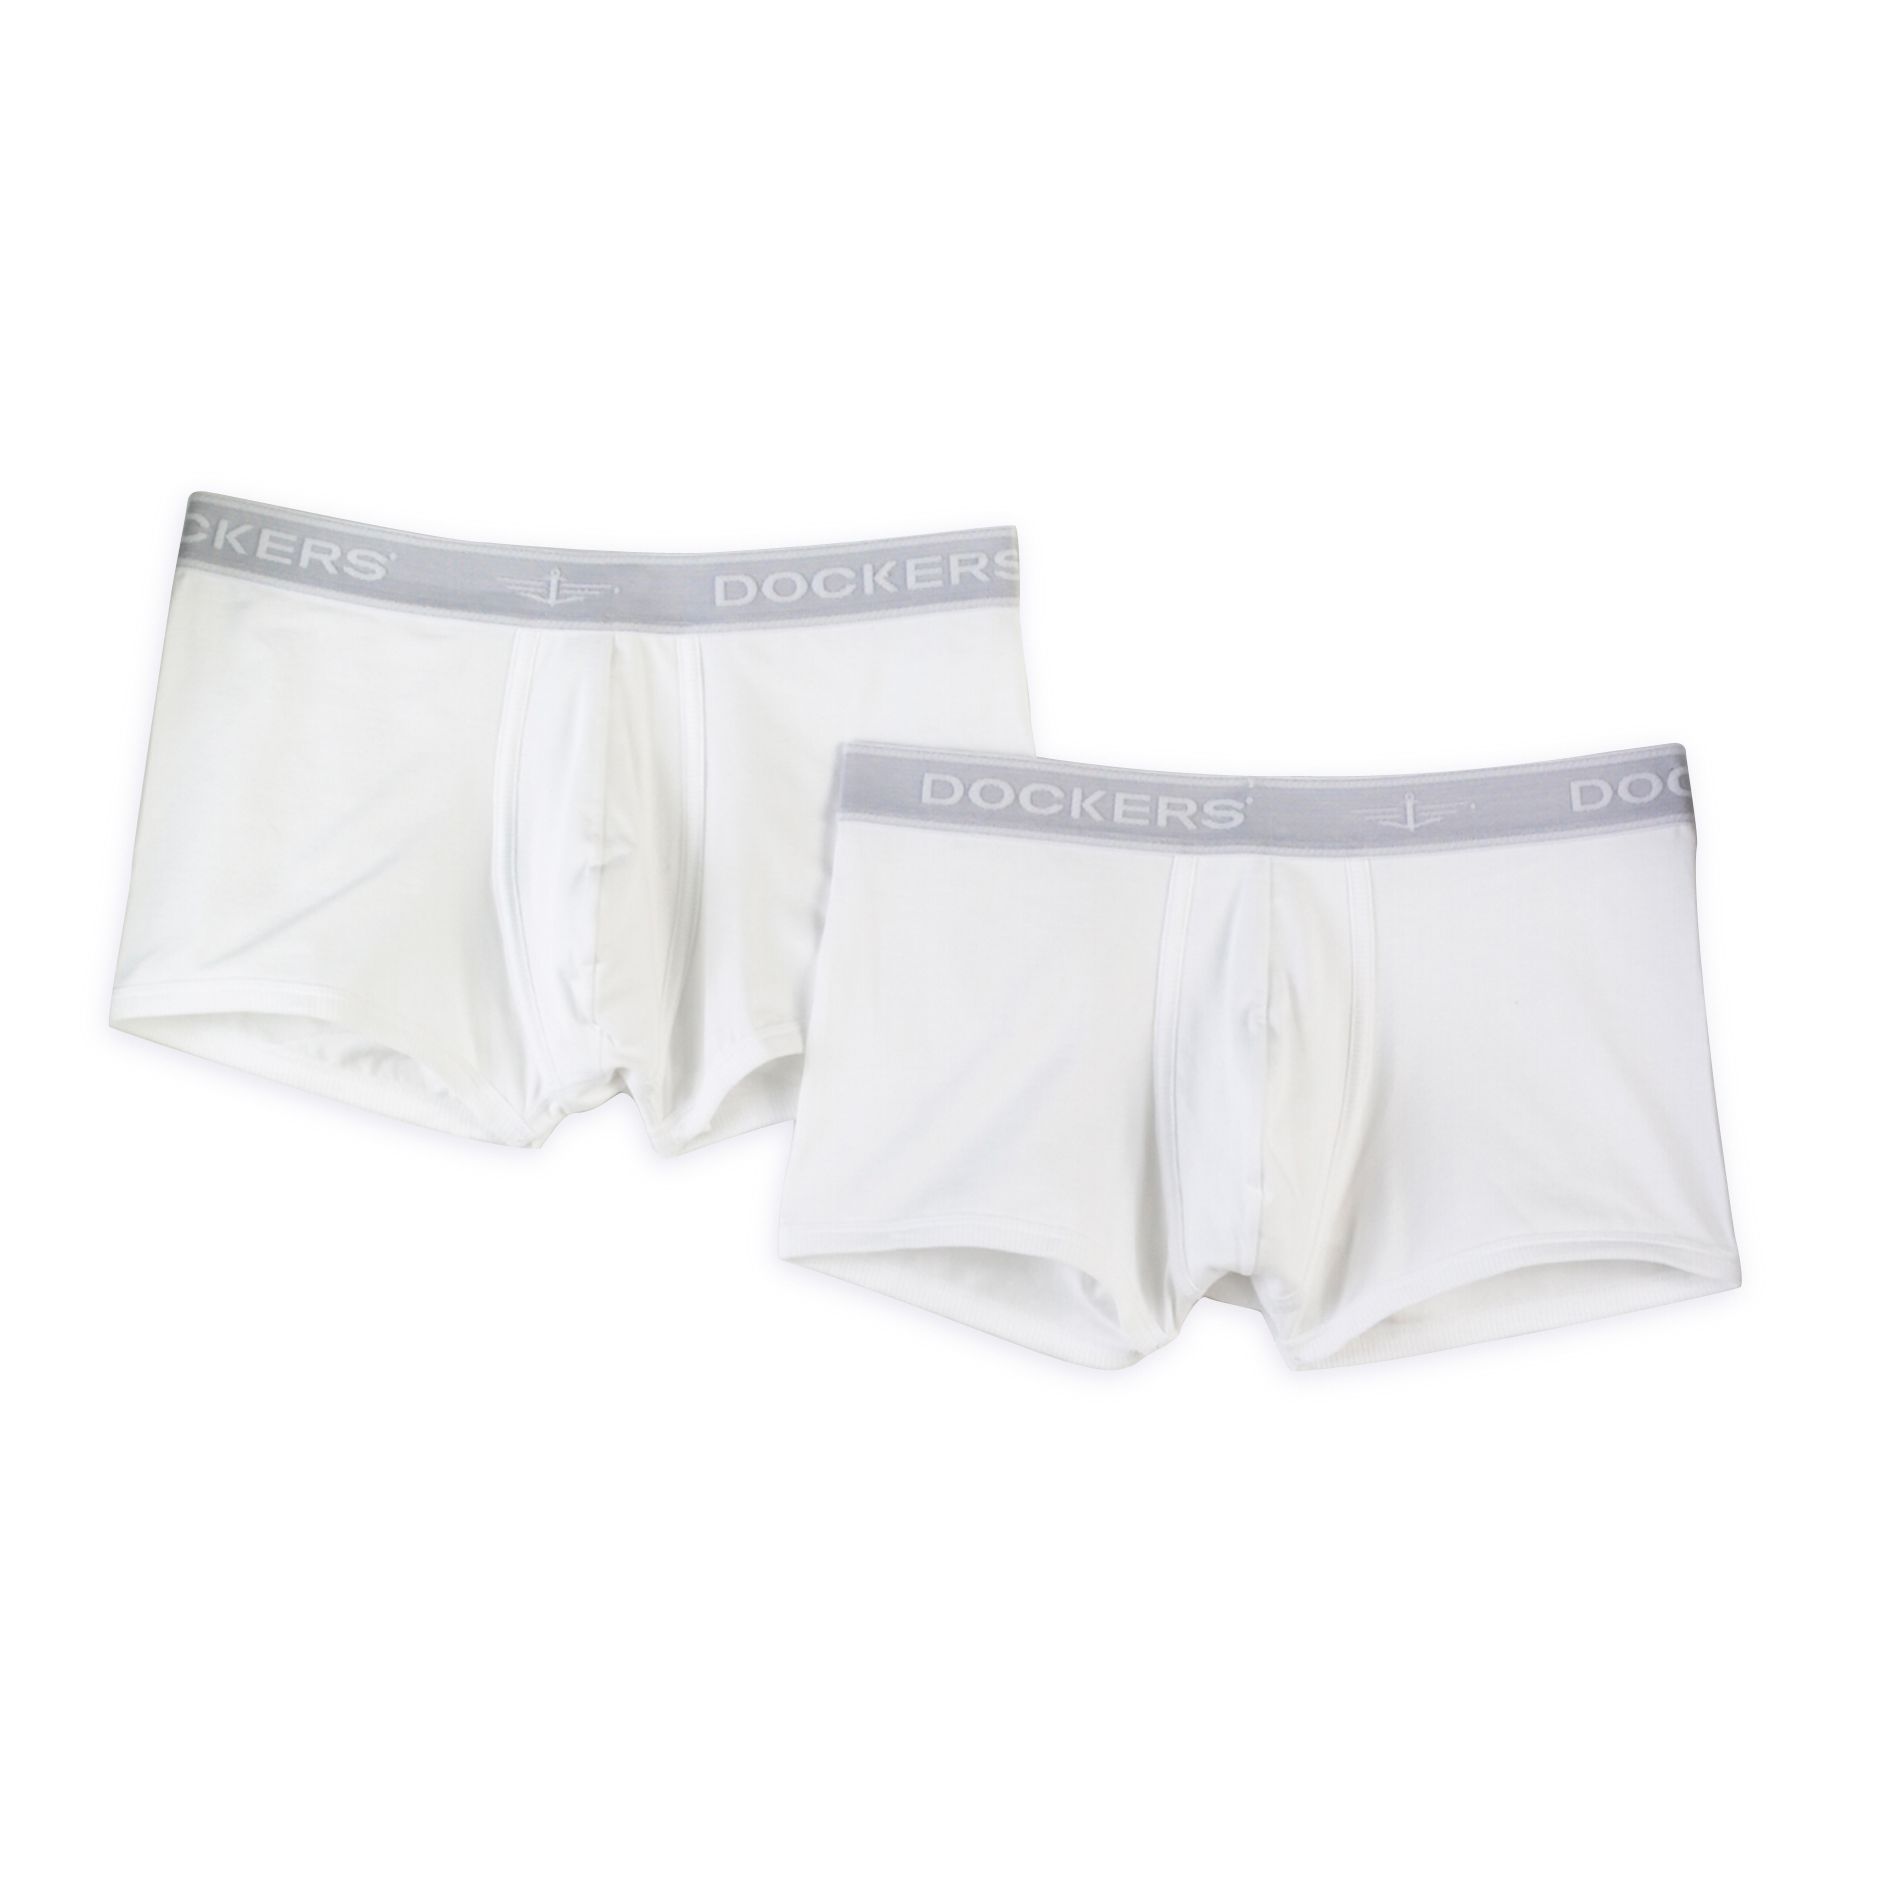 Dockers Trunks (2 pack) - additional colors available